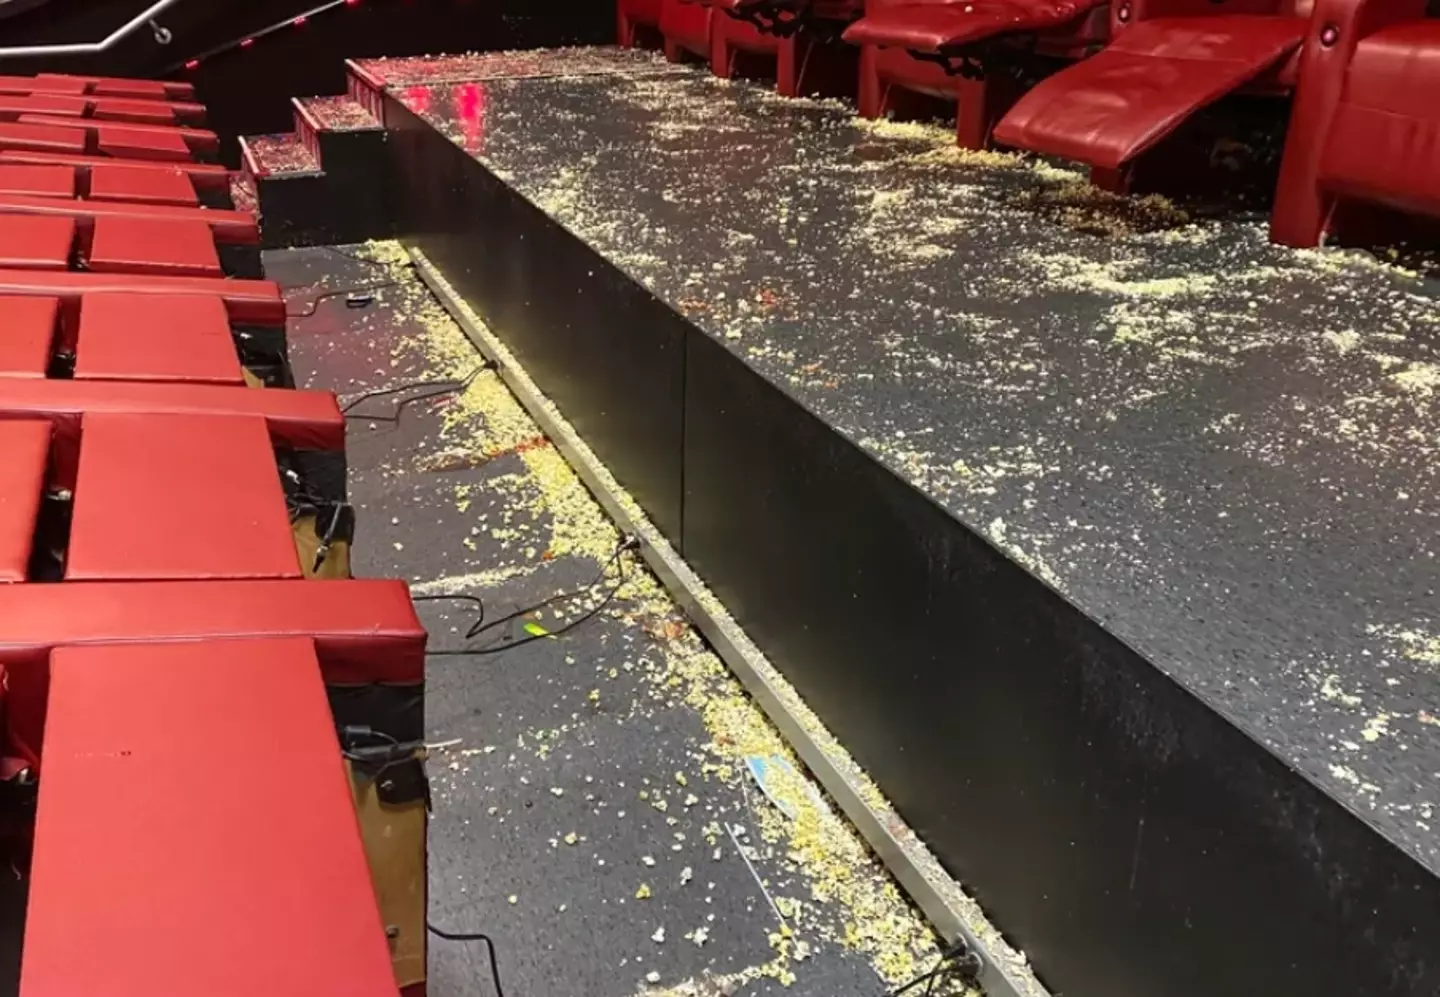 Given the cost of popcorn that's quite an expensive pile on the floor.